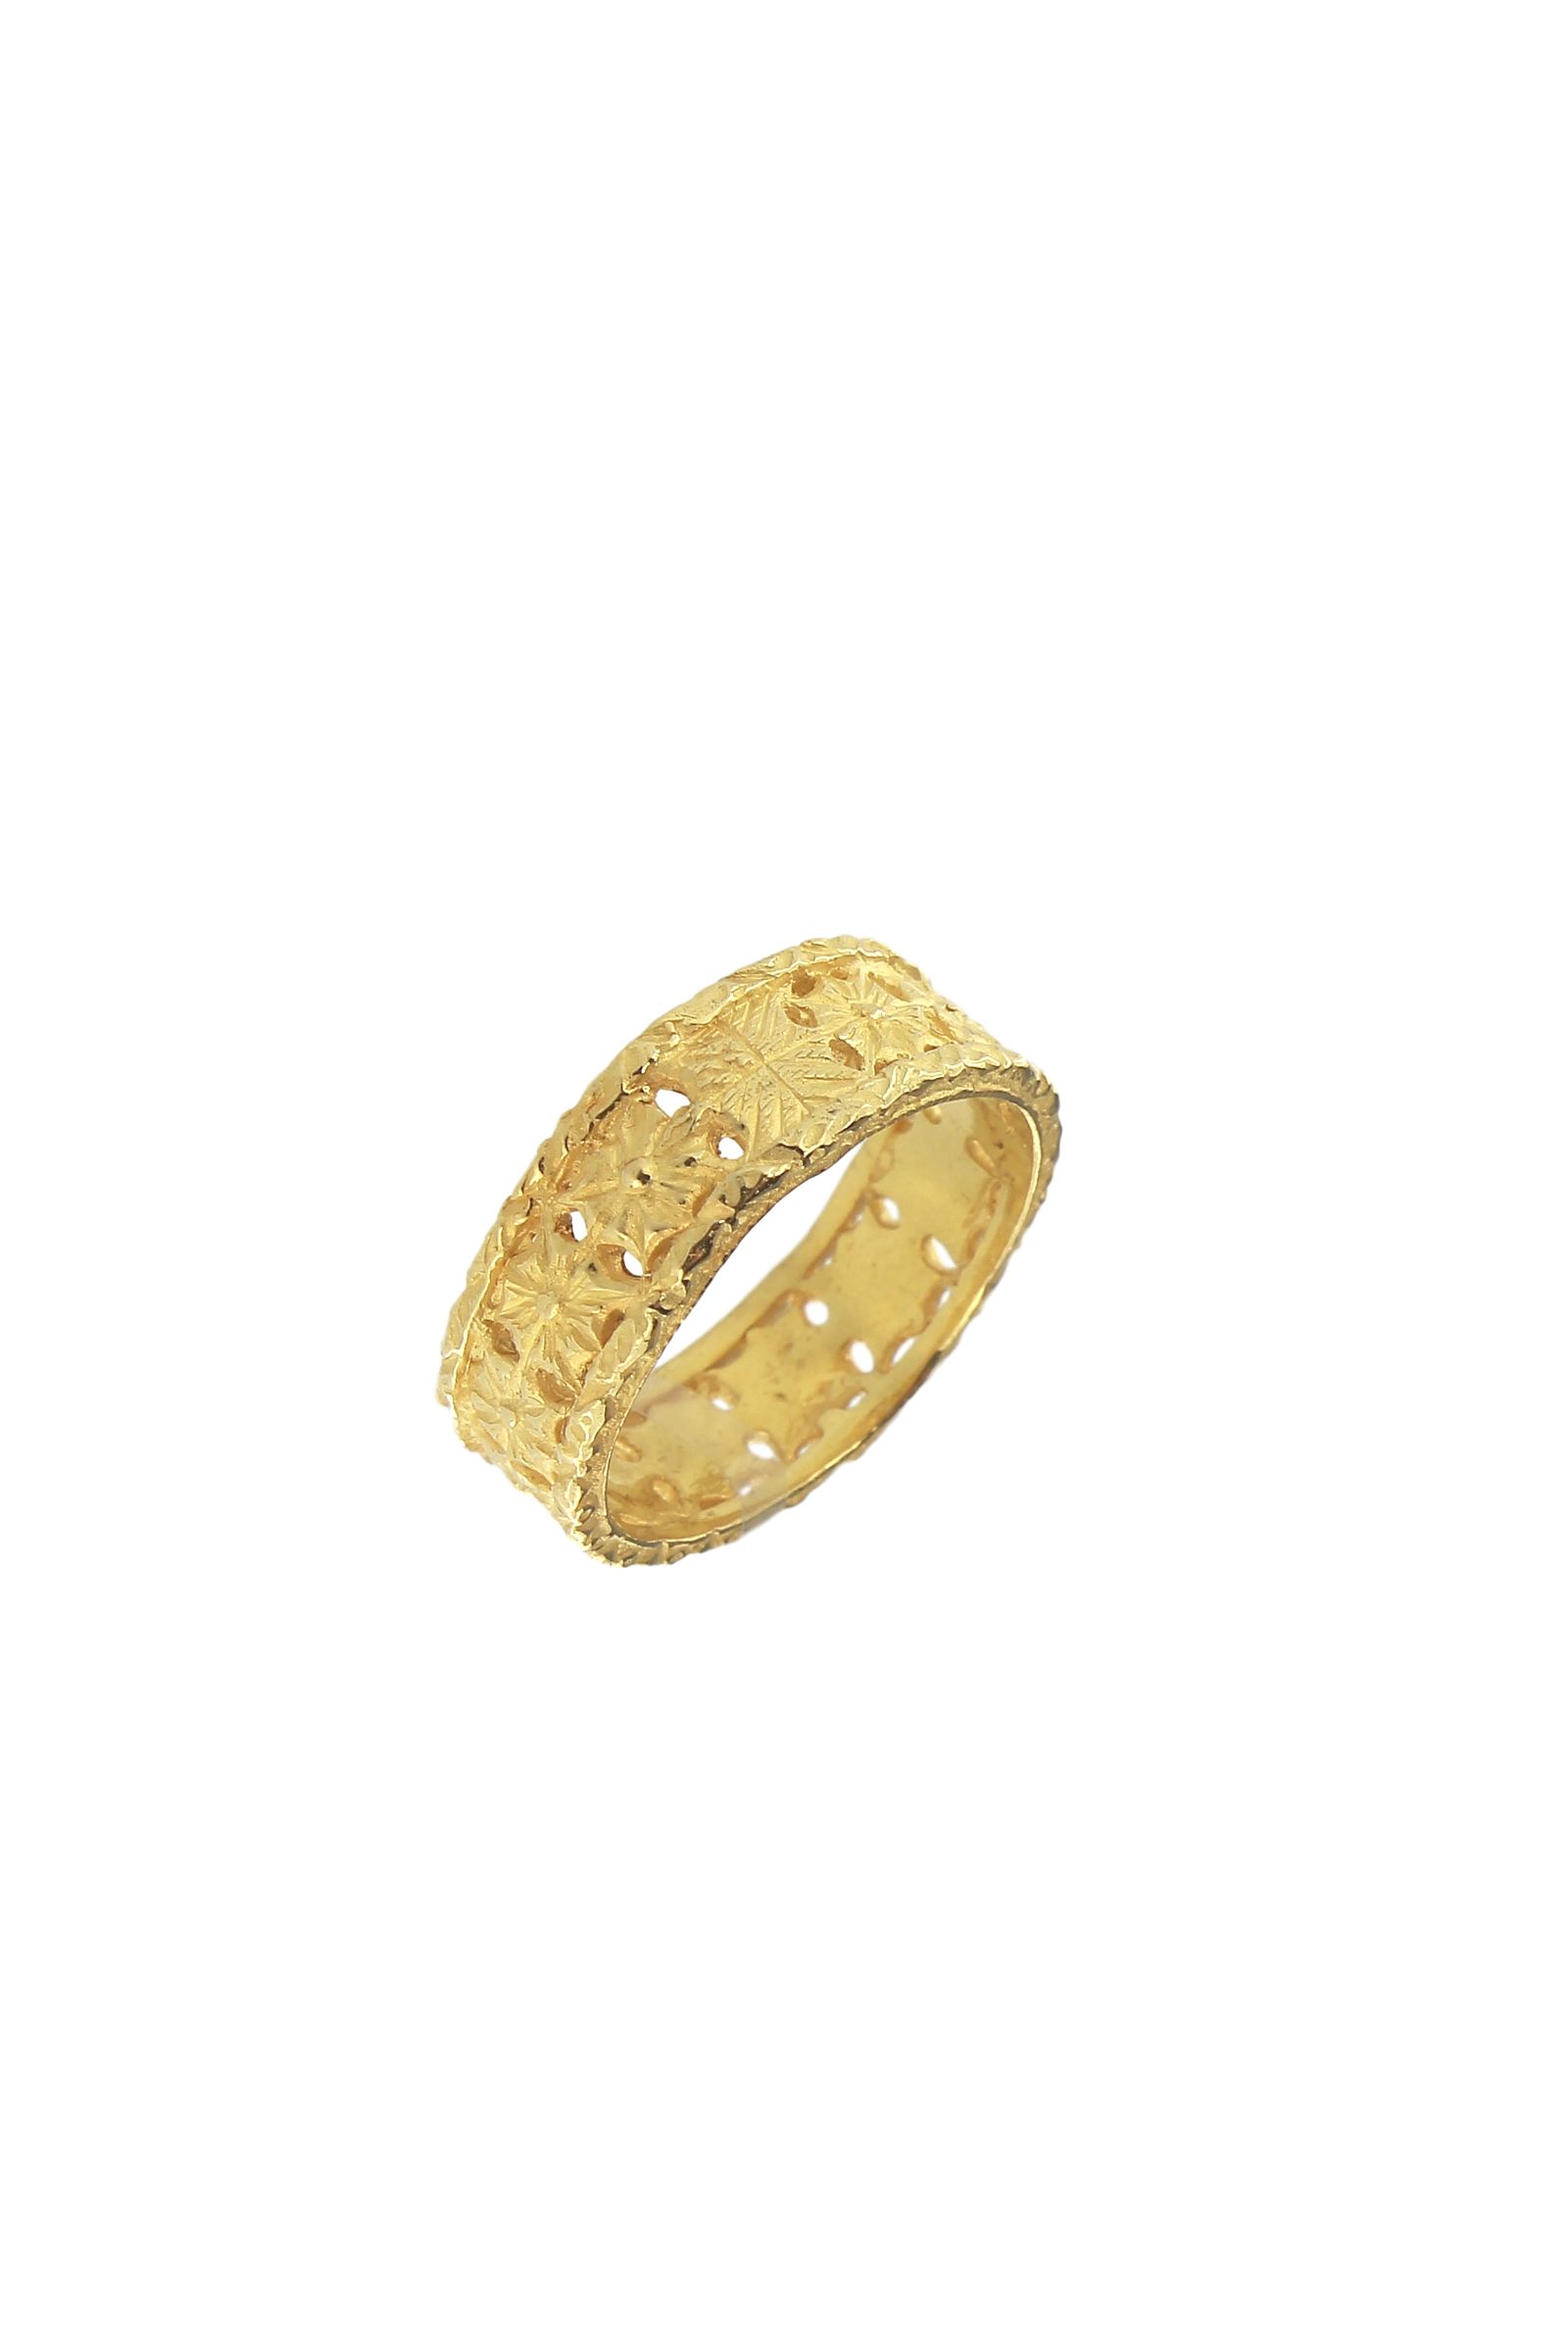 SE126C-18-Kt-Yellow-Gold-Band-Ring-1_